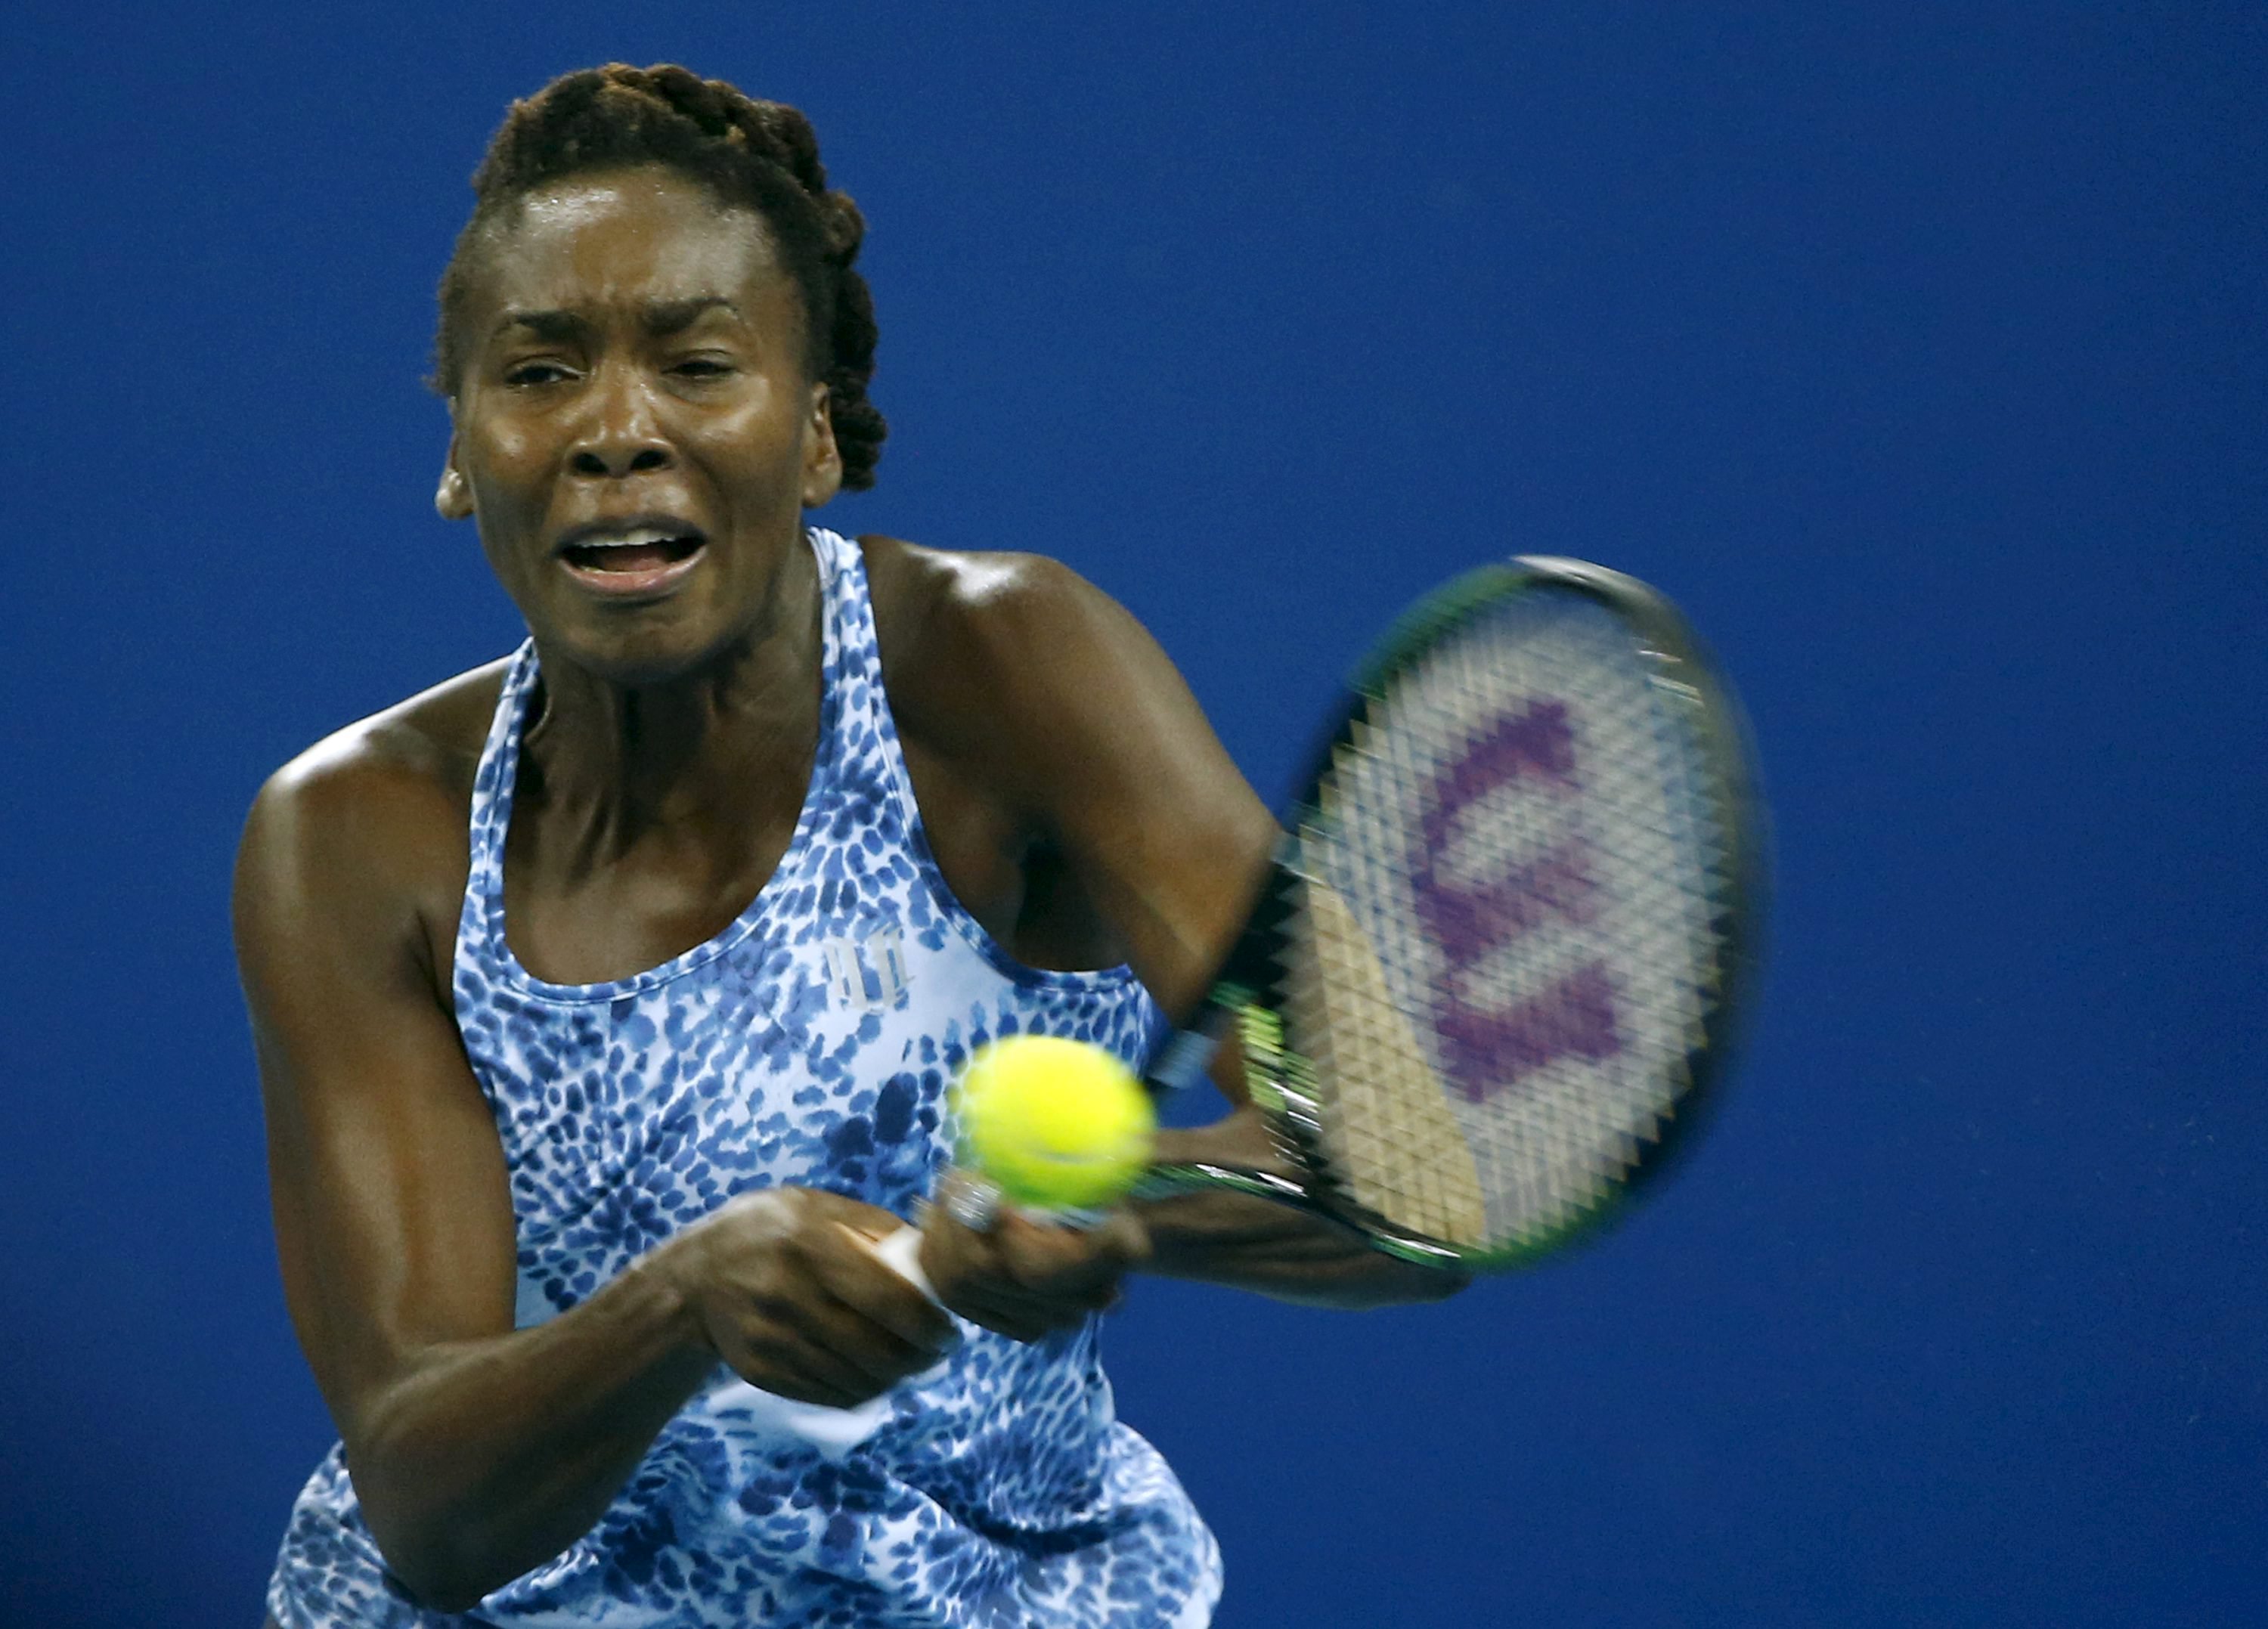 Venus Williams of U.S. hits a return against Ana Ivanovic of Serbia during their women's singles match at the China Open tennis tournament in Beijing, China, October 6, 2015.    REUTERS/Kim Kyung-Hoon